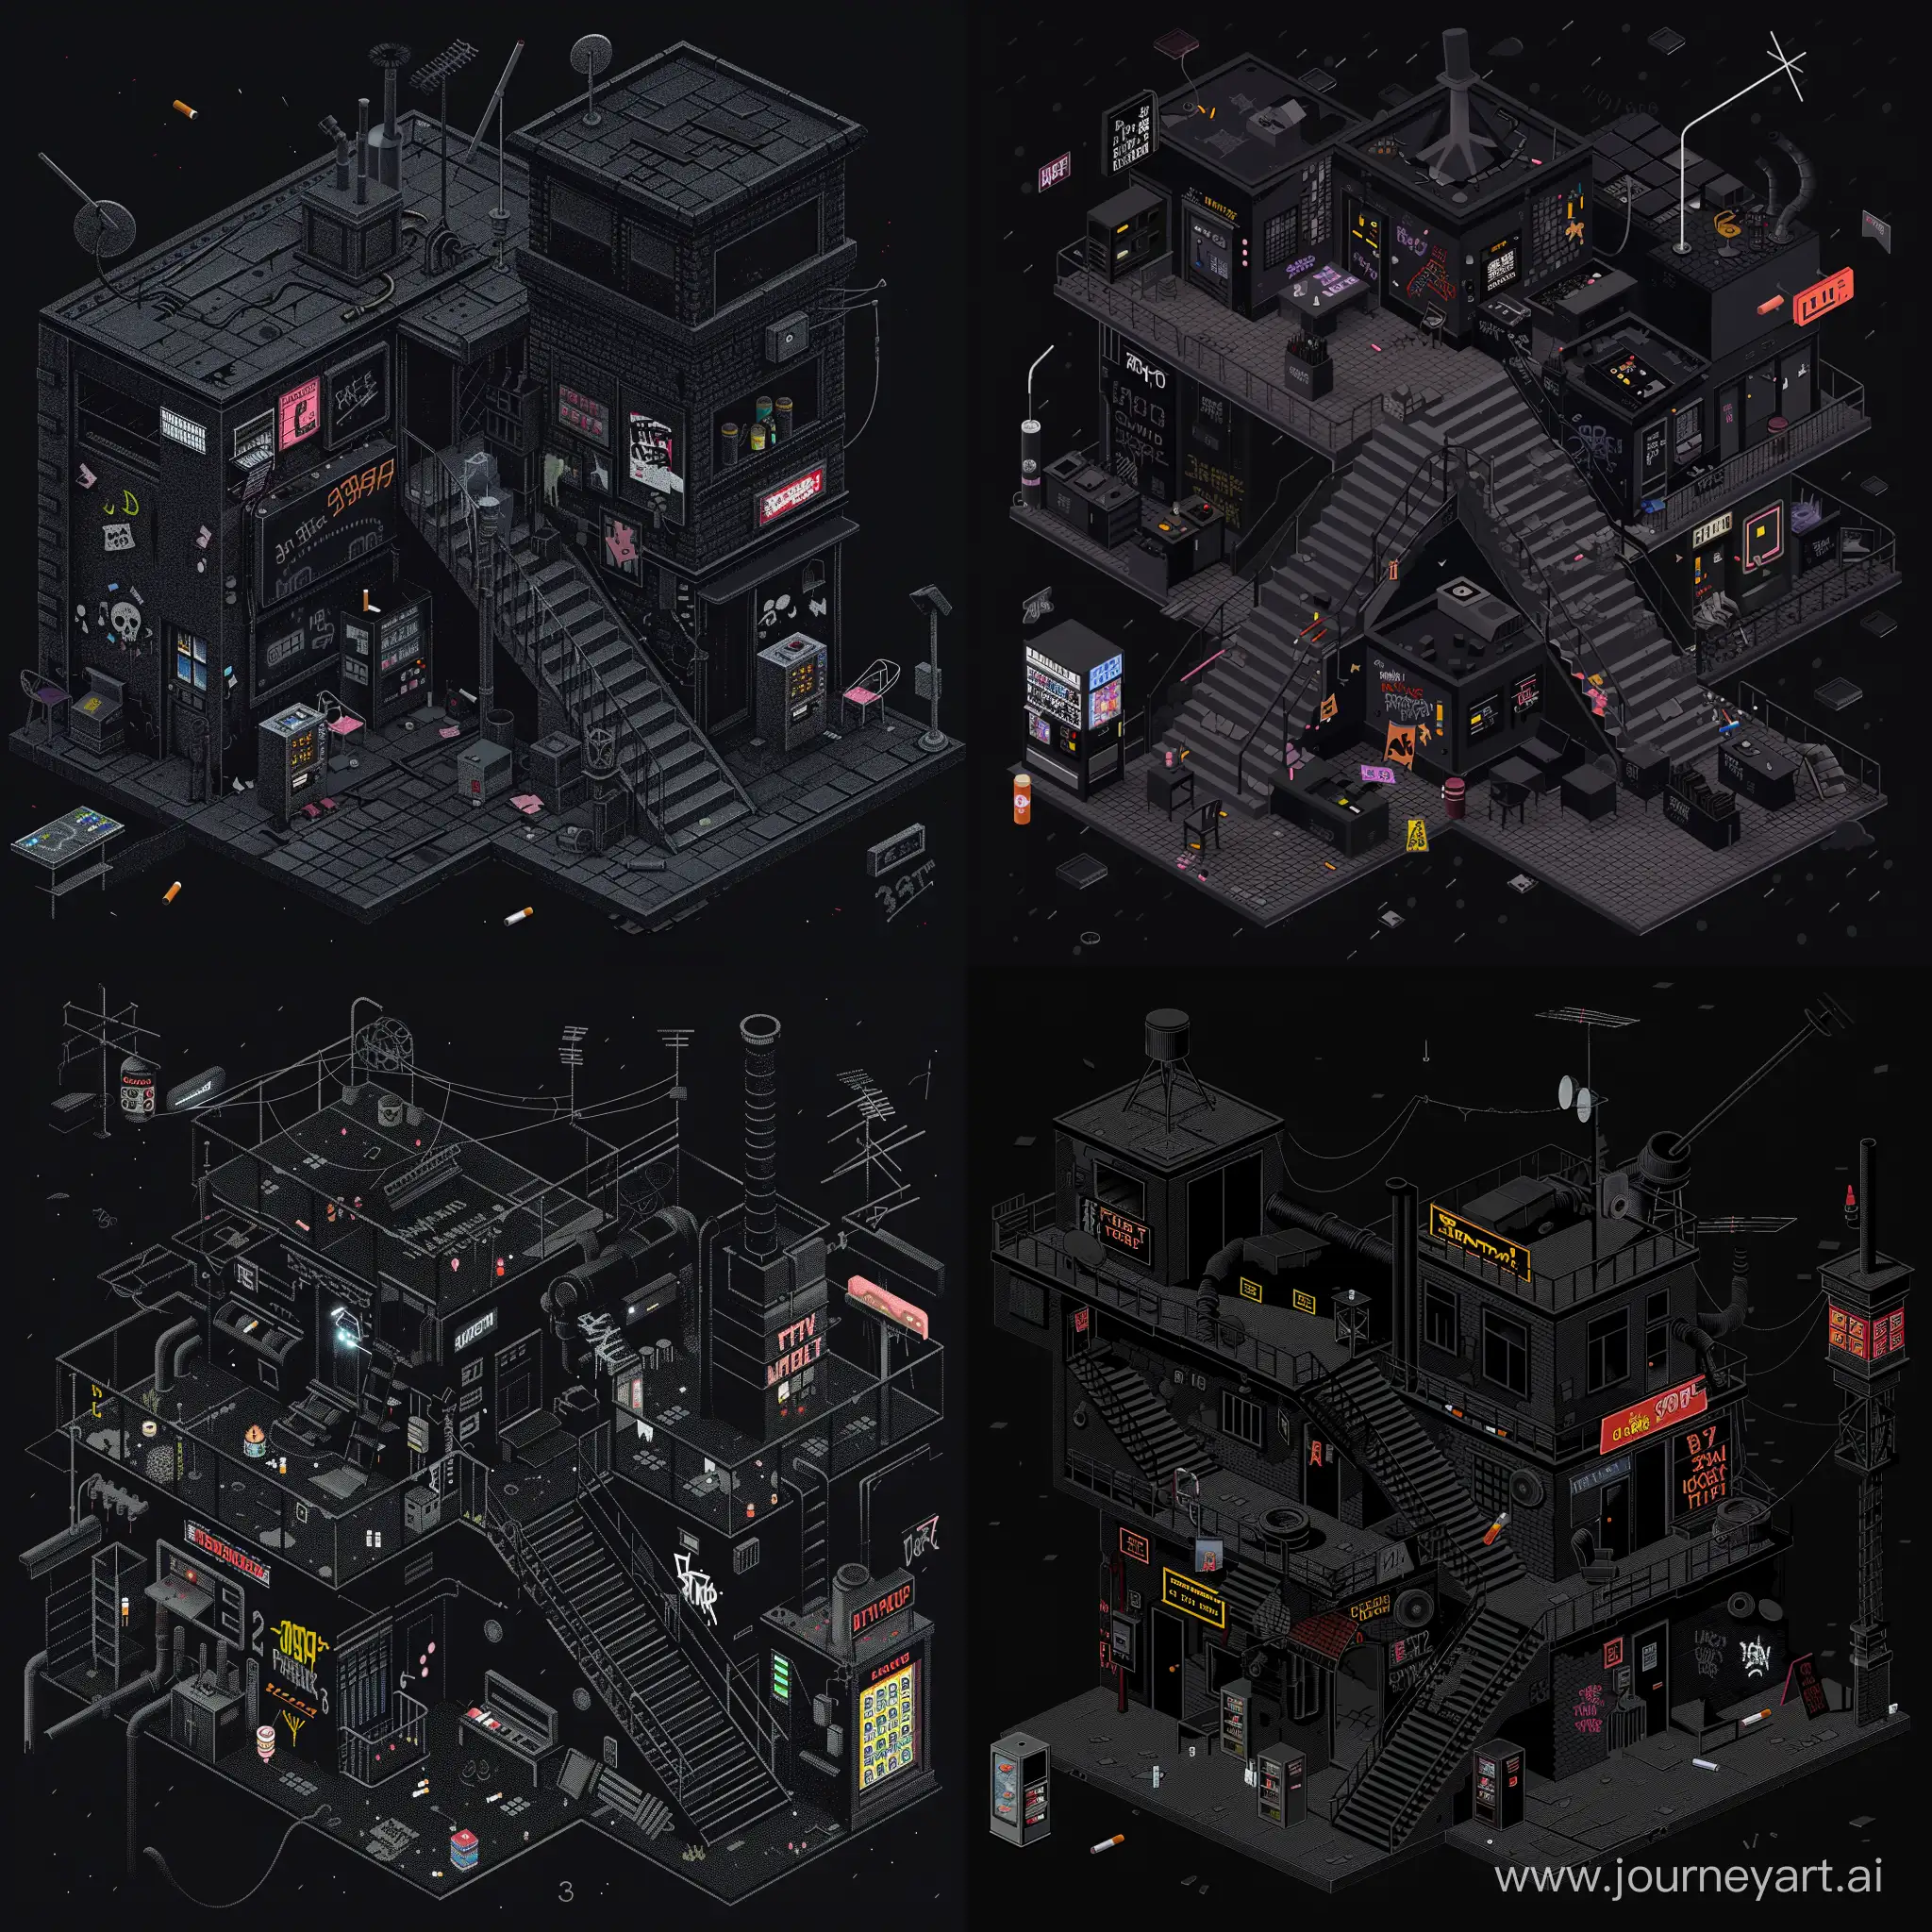 Eerie-1980s-Isometric-Game-Map-Abandoned-Cityscape-with-Neon-Telephone